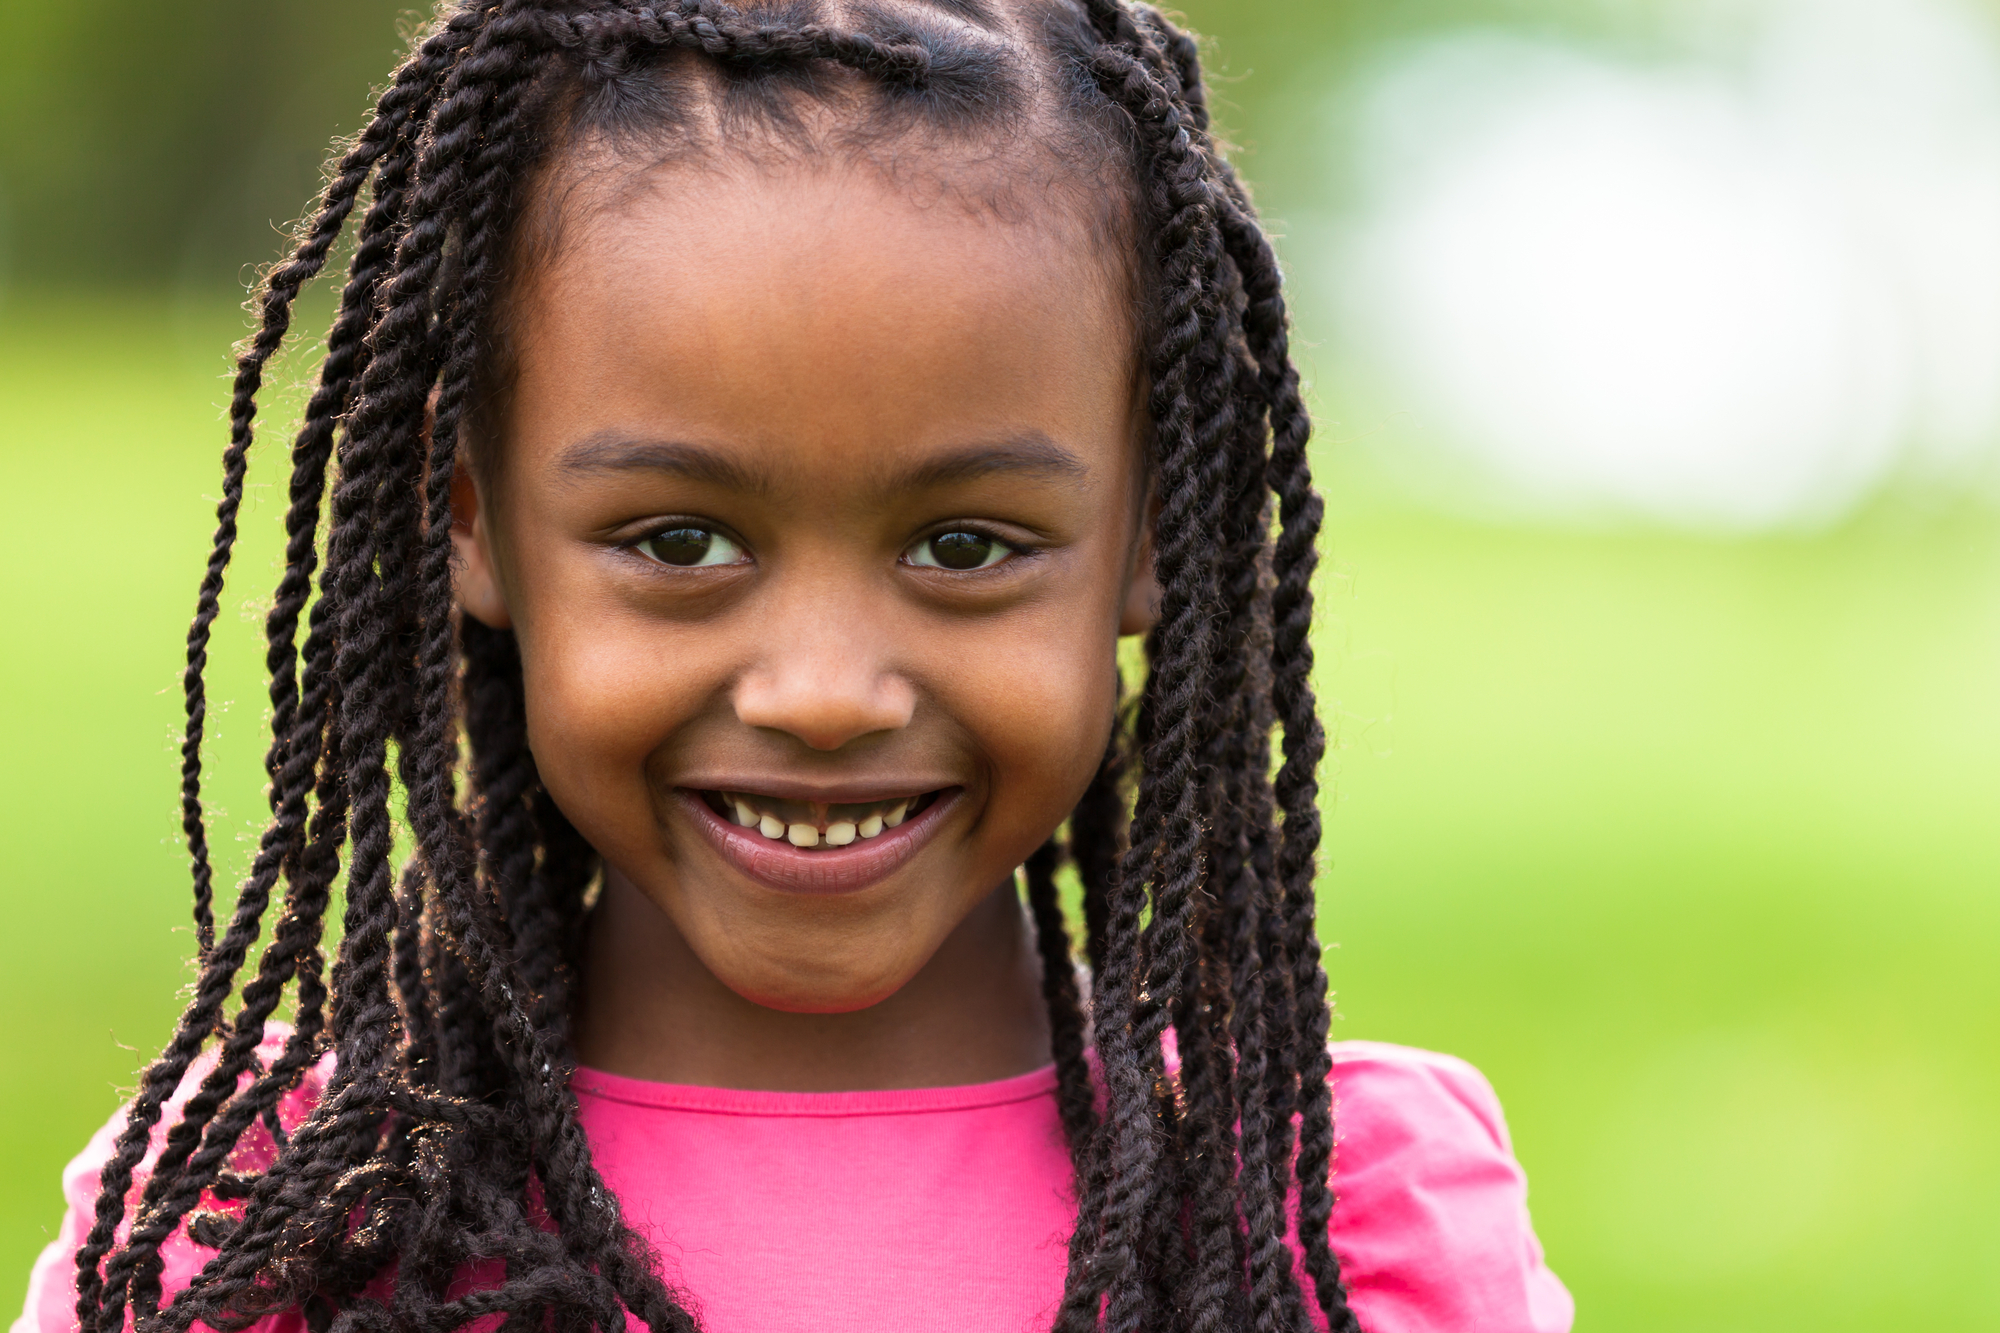 Close-Up Portrait Of A Cute Young Black Girl